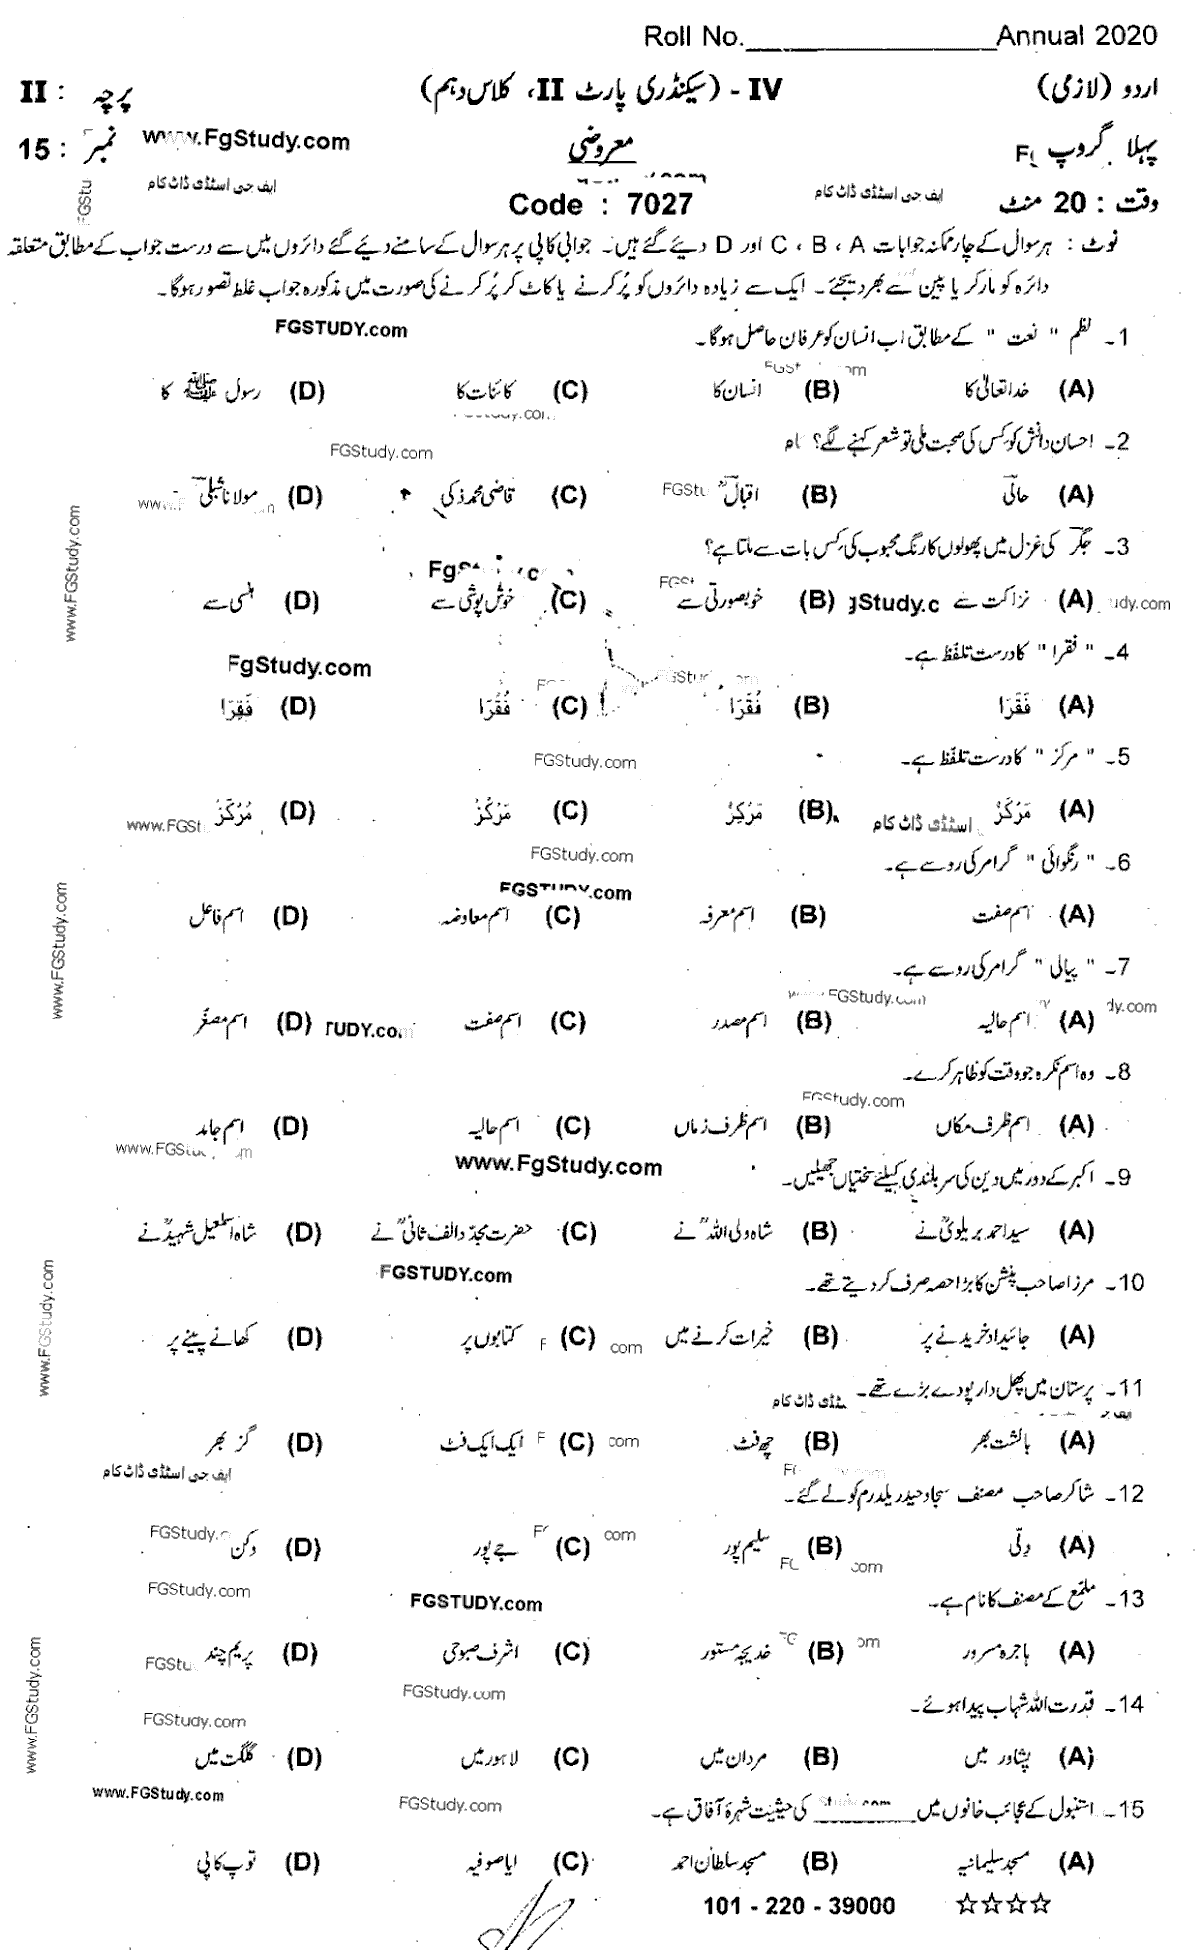 Urdu Group 1 Objective 10th Class Past Papers 2020